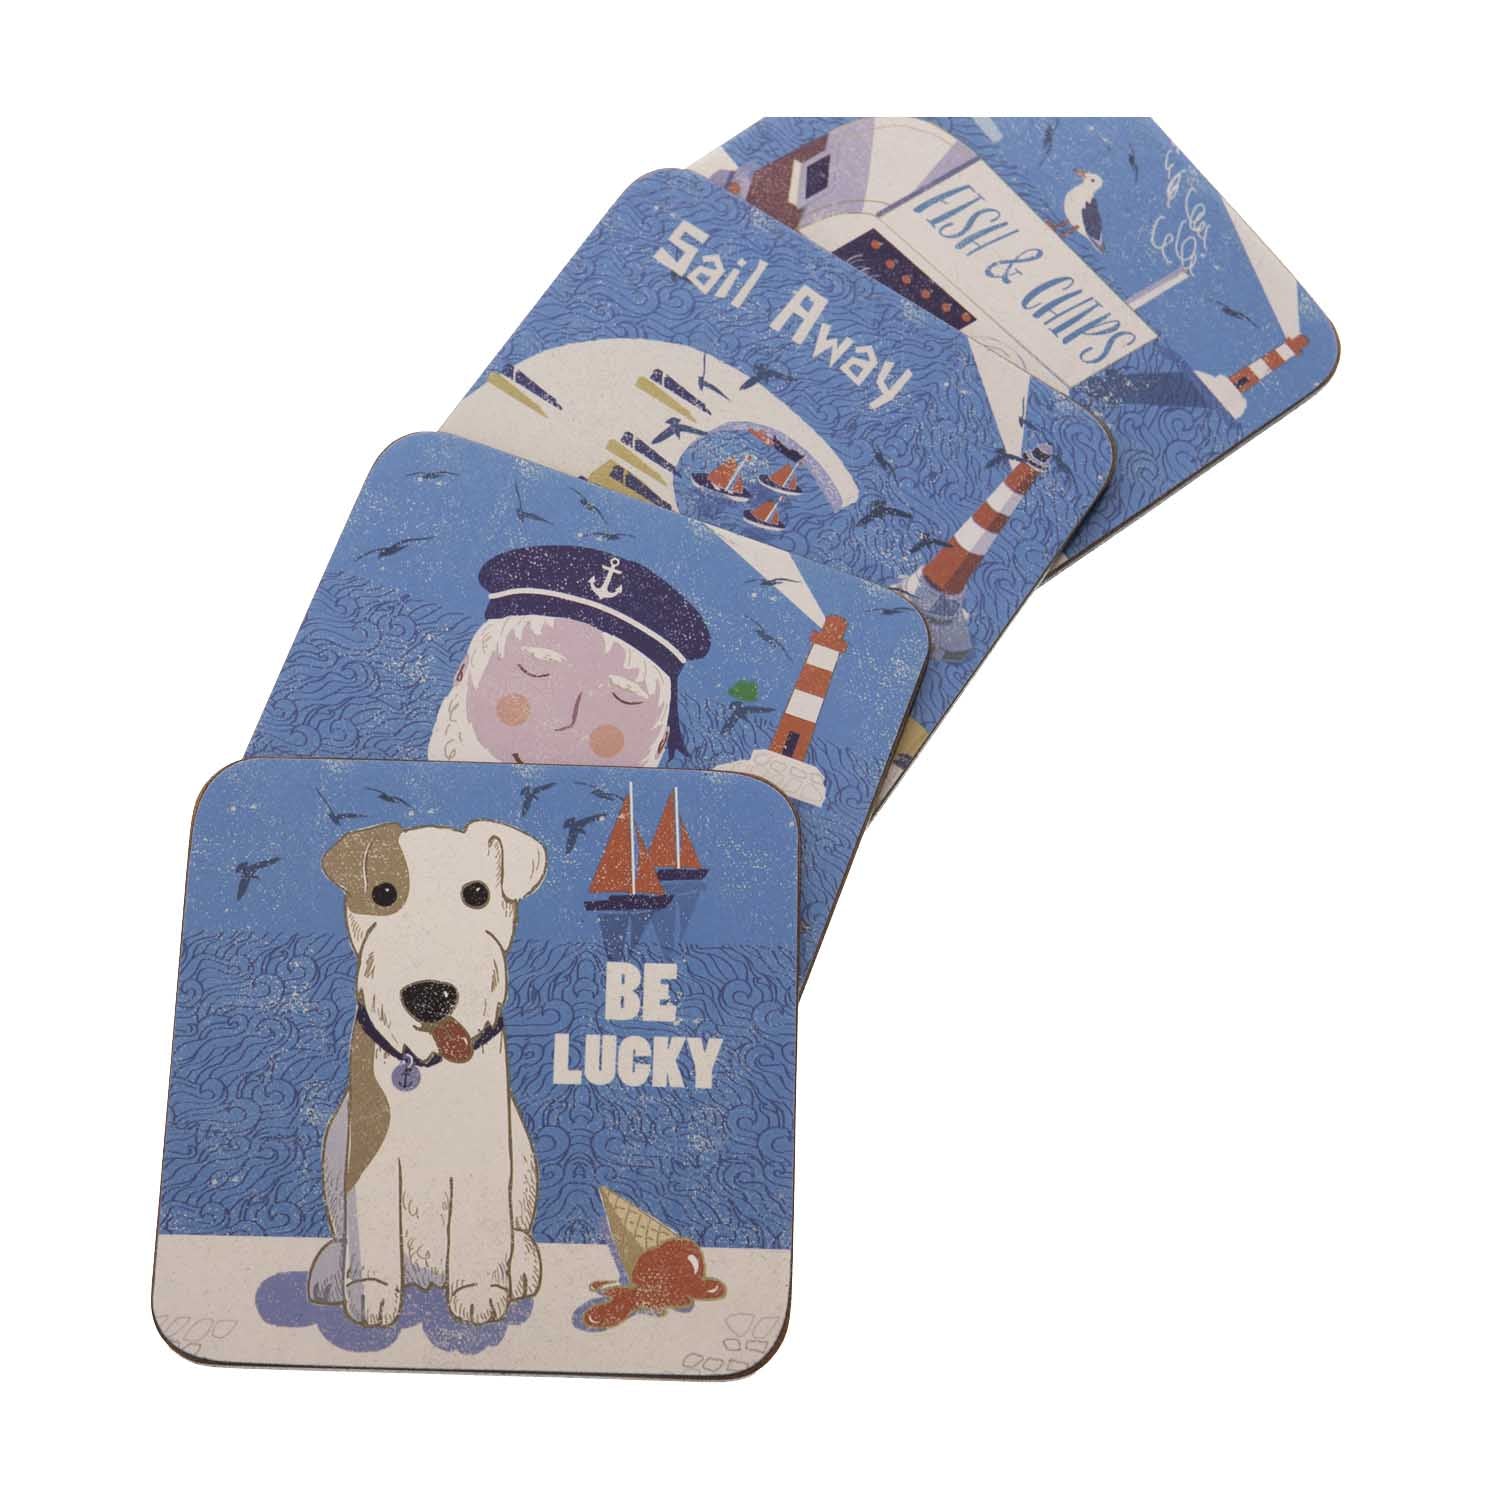 Dog Lover Gifts available at Dog Krazy Gifts – Jill White Rocket68 Ahoy Coasters available at www.dogkrazygifts.co.uk